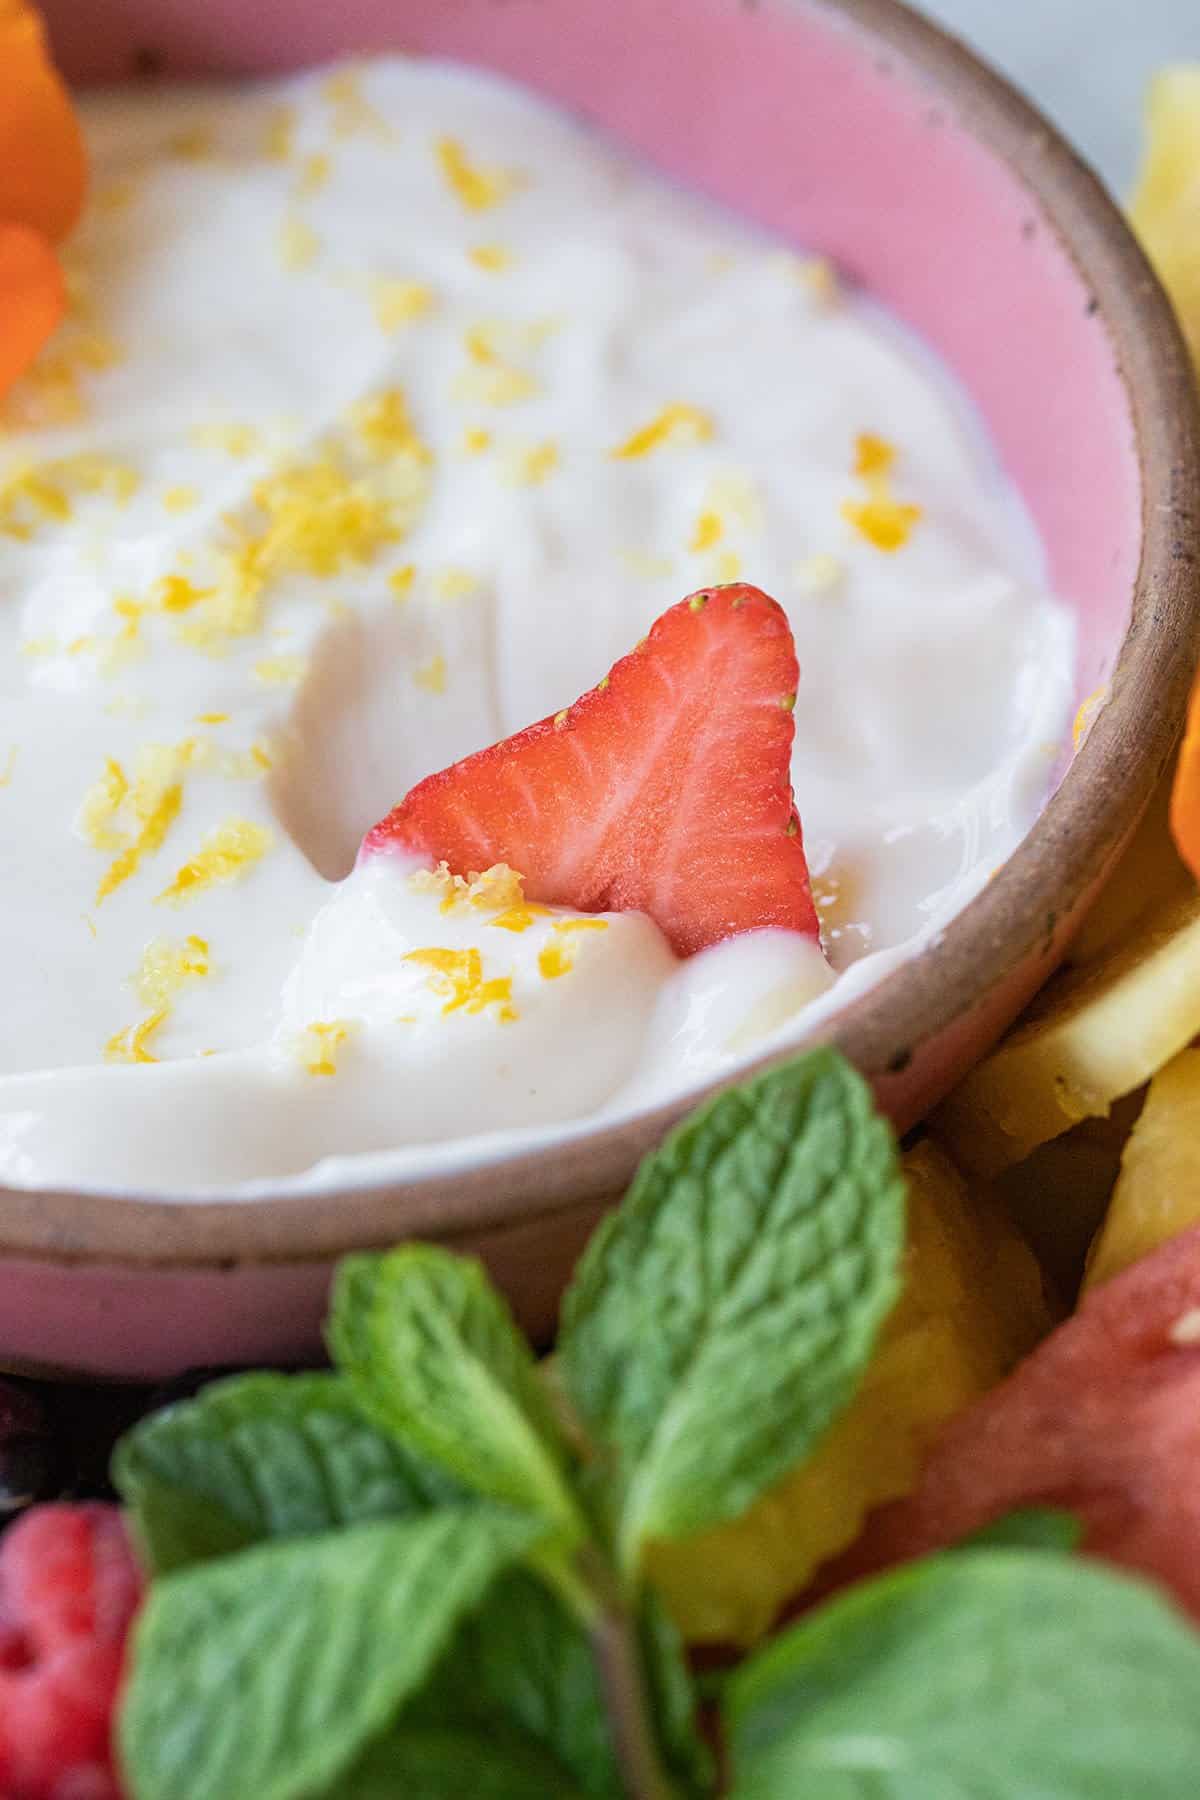 strawberry being dipped in a yogurt dip